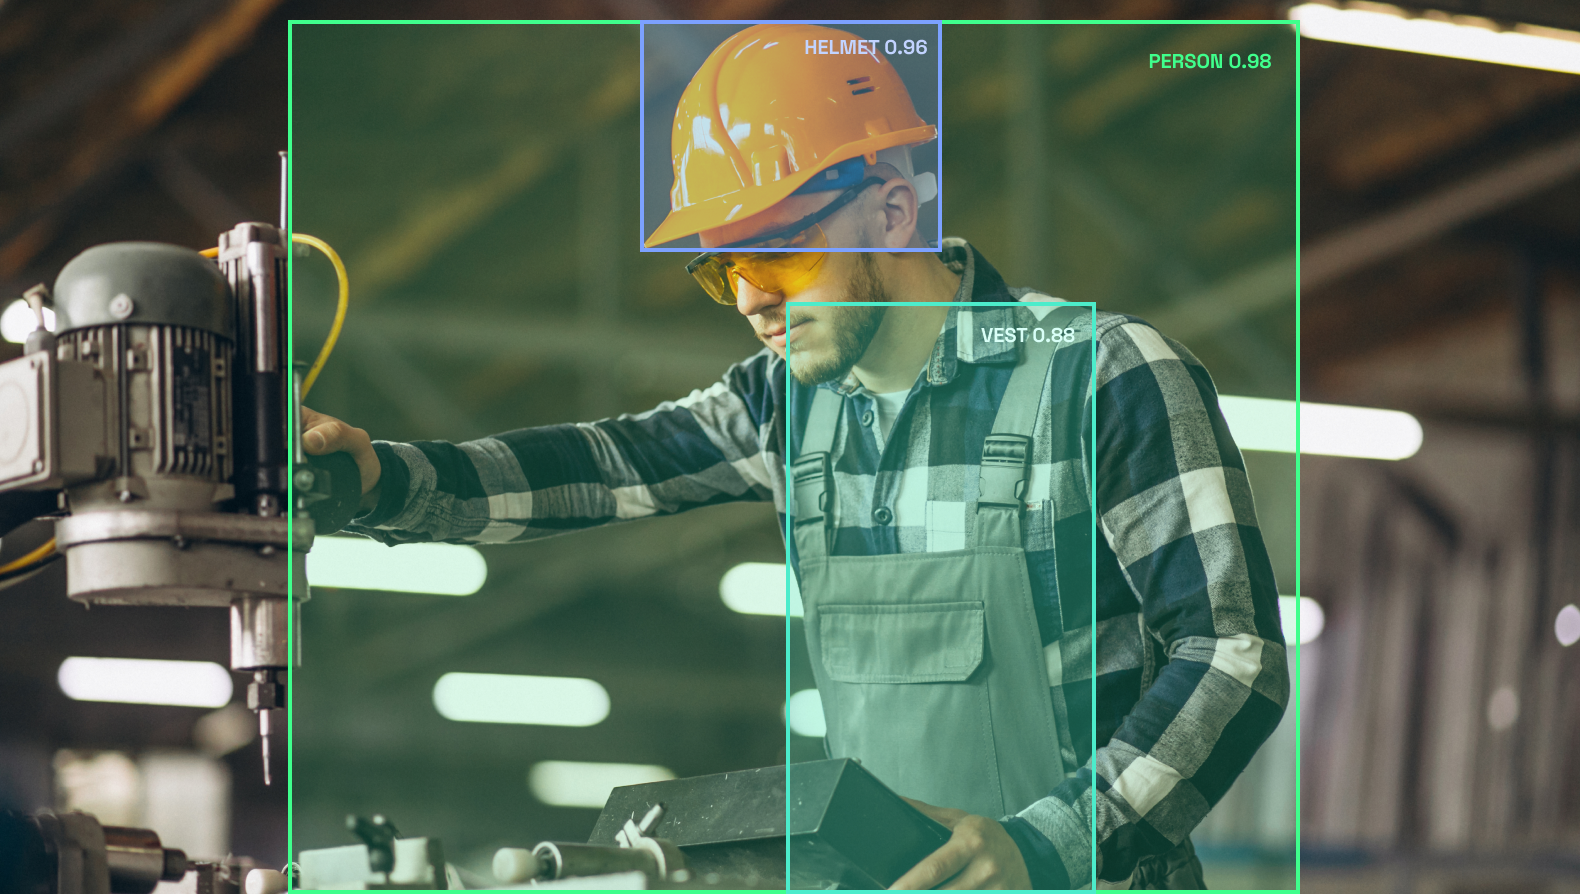 Worker safety suit and equipment identification using image recognition.